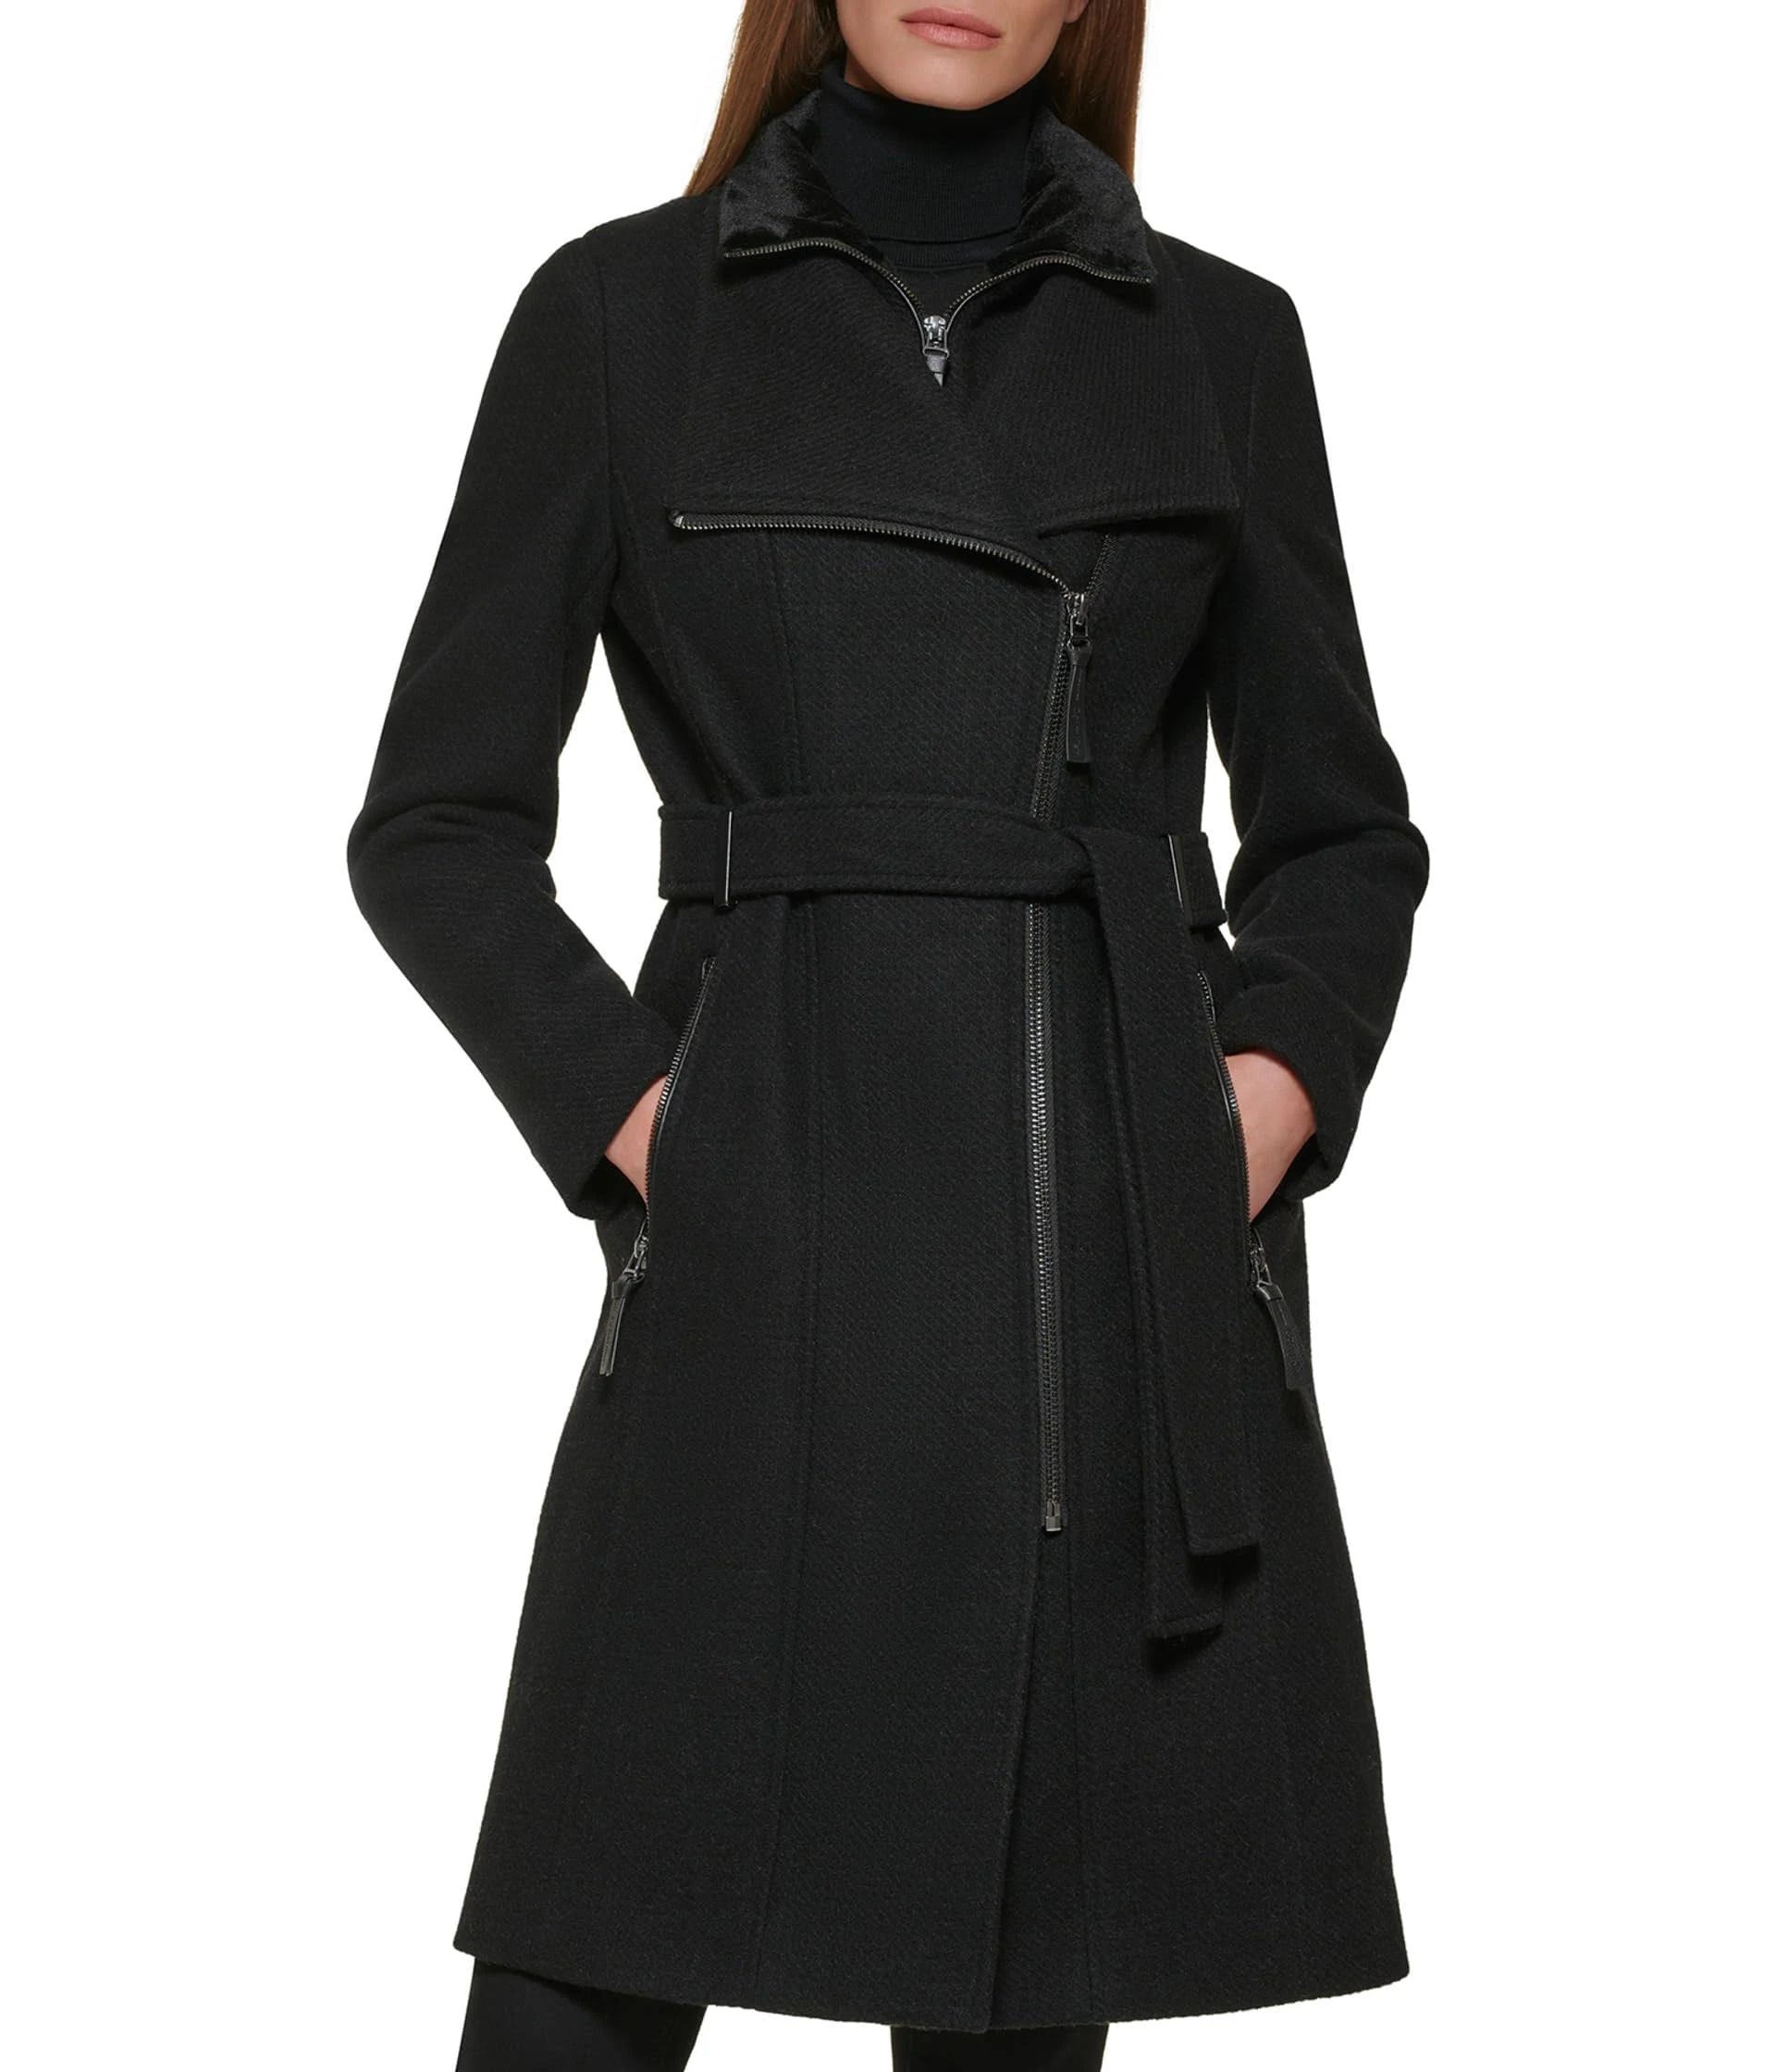 Chic black belted wrap coat for a stylish look | Image